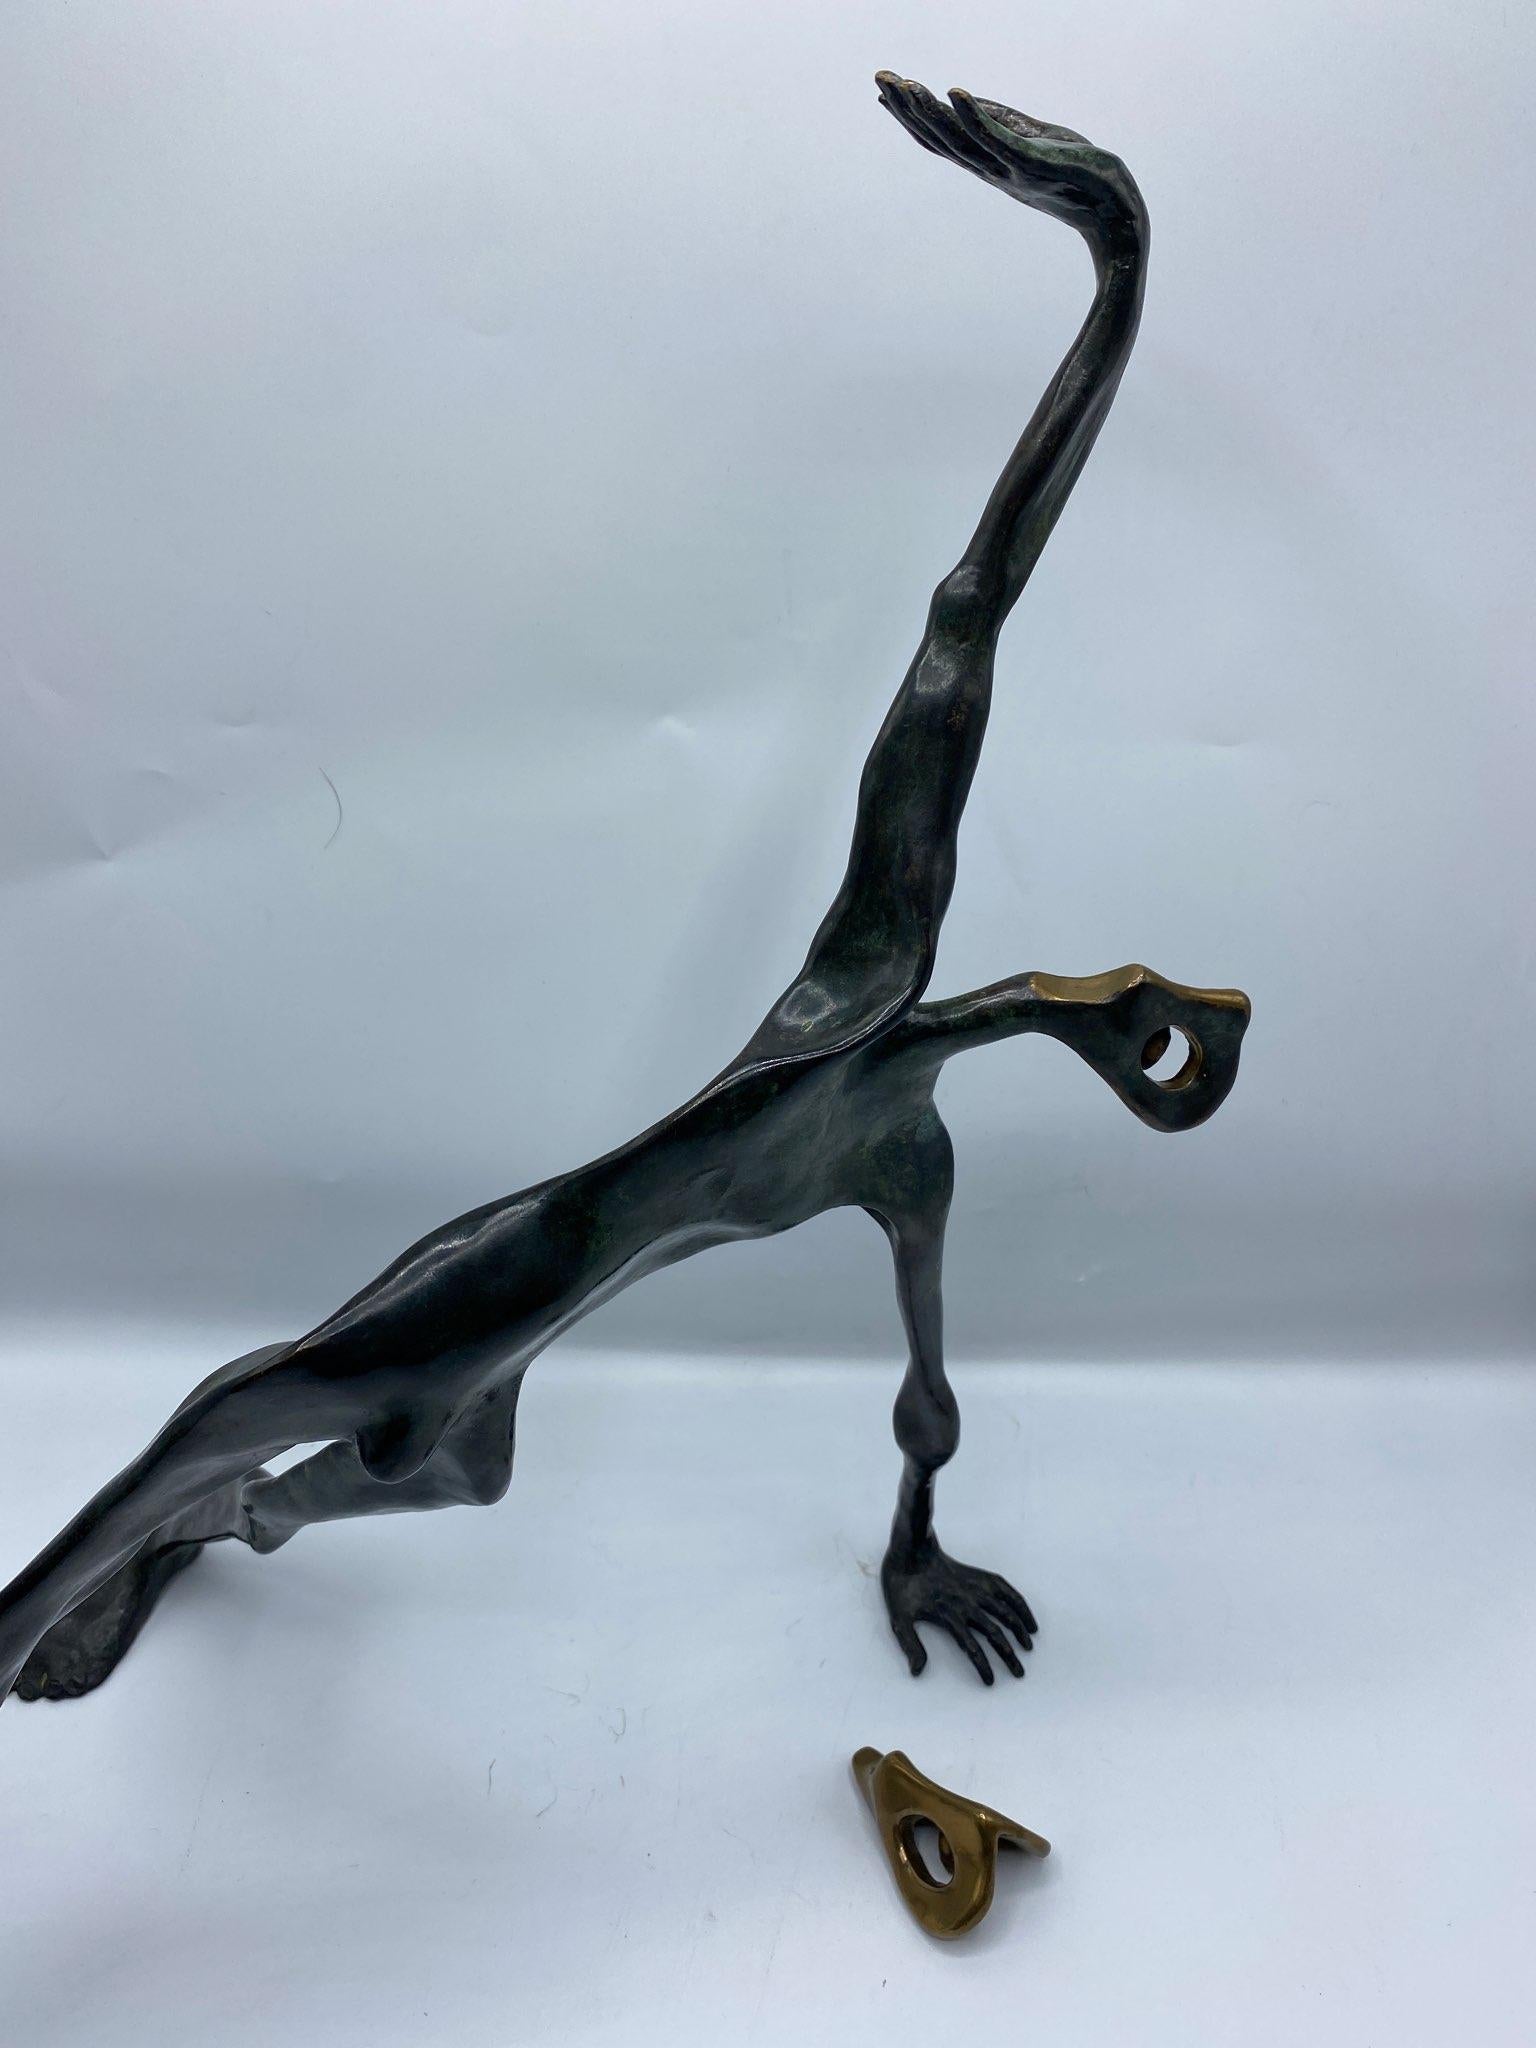 Bronze figure of a male nude and a small bronze mask. The figure has his legs stretched with one hand to the ground and the other to the sky. The small bronze cast mask is placed separately next to him. The bronze of the man is patinated in a deep